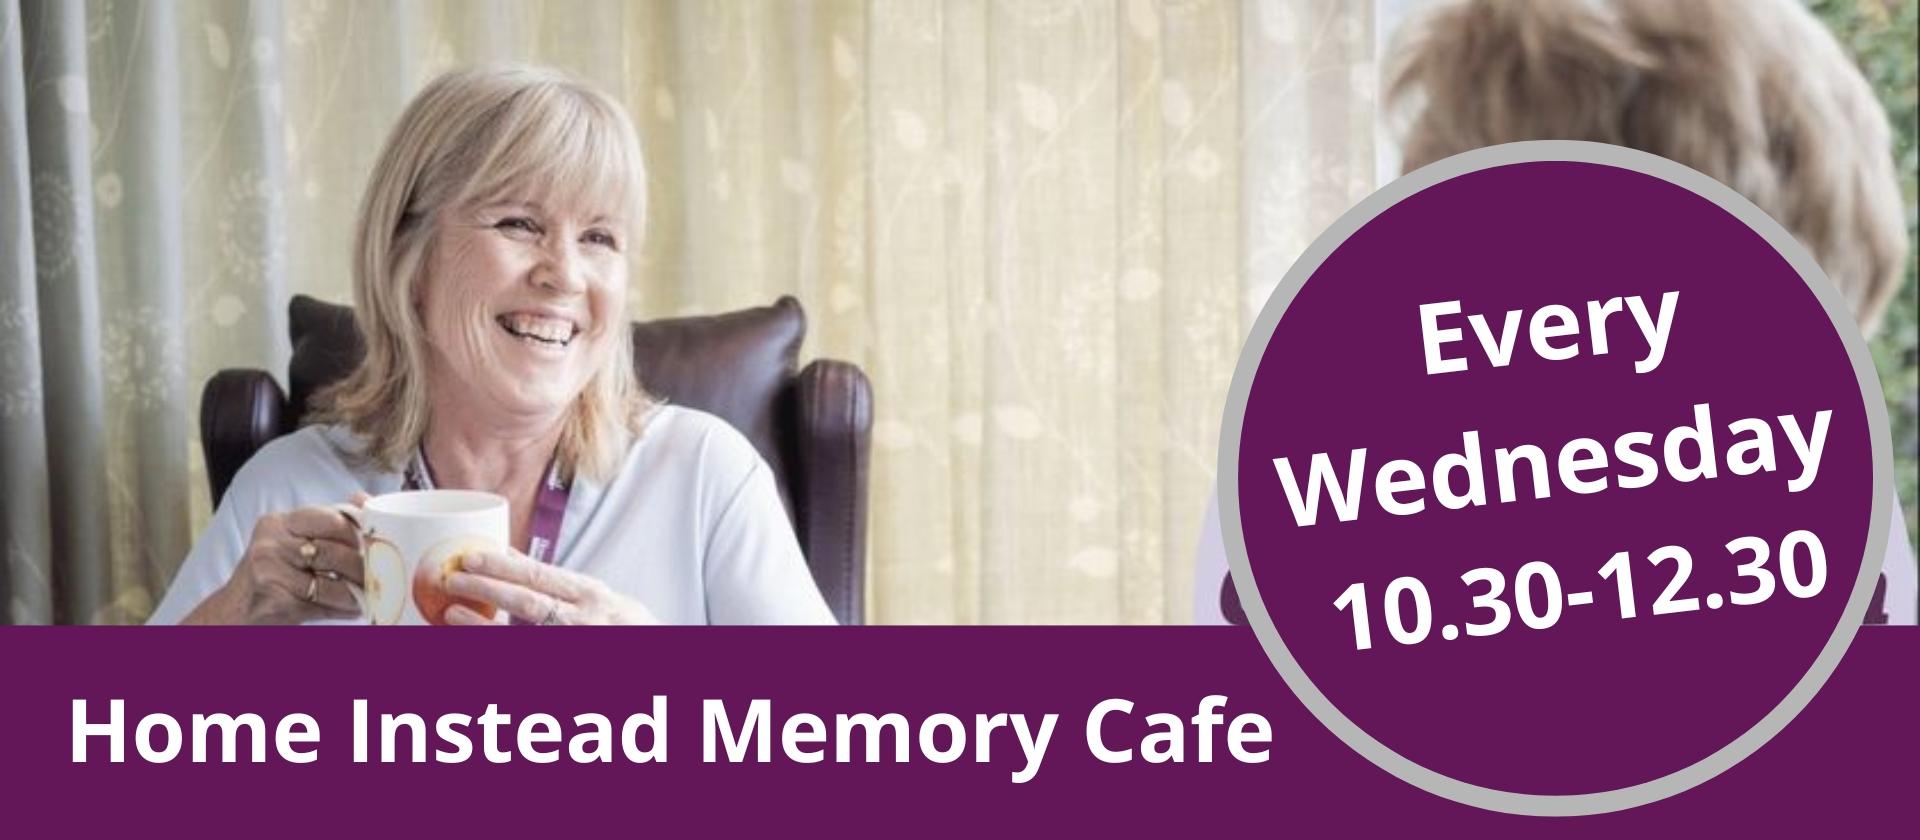 Atherstone leisure complex, dementia and memory cafe